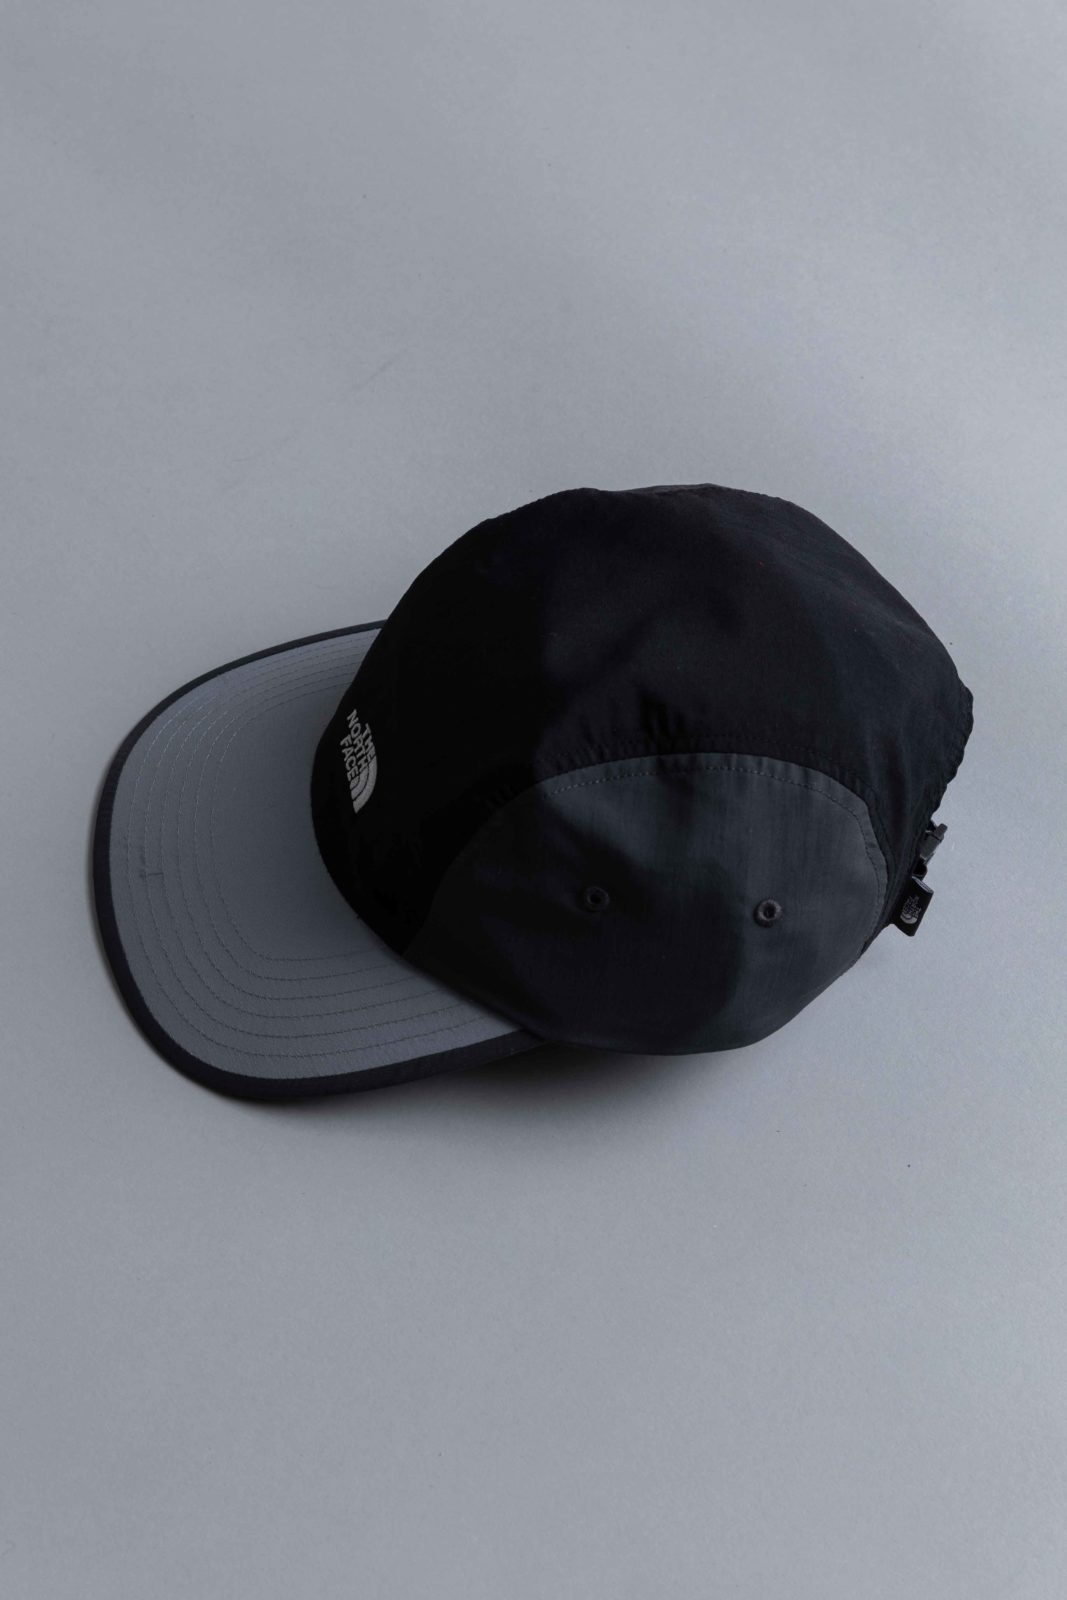 The North Face 92 Rage Ball Cap sales 